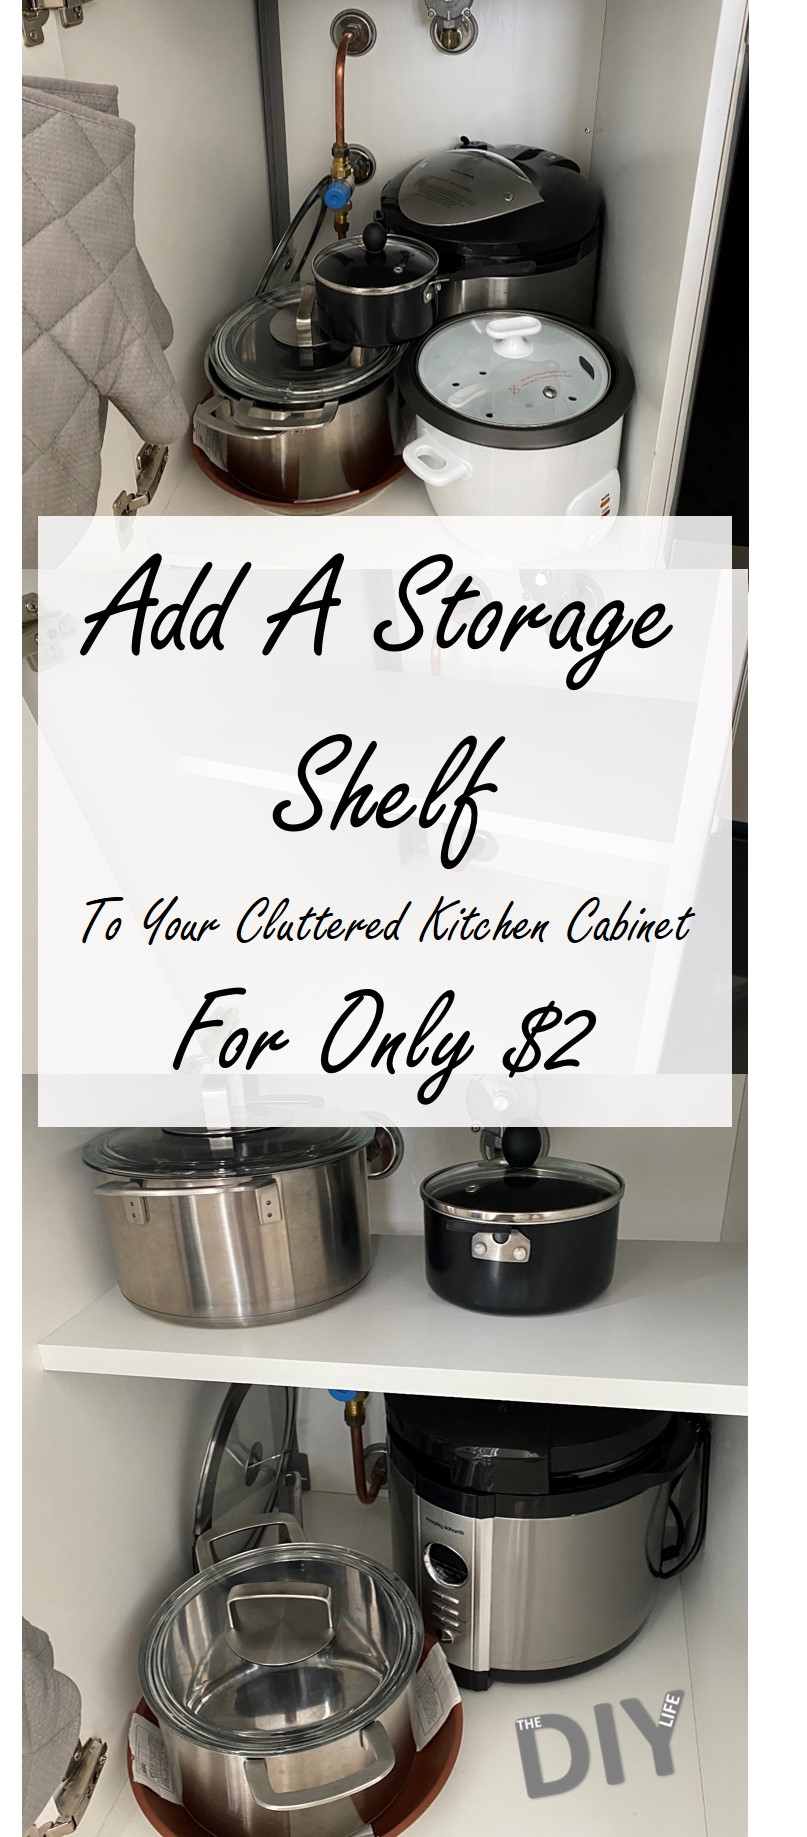 How To Add An Extra Storage Shelf To Your Cluttered Kitchen Cabinet For $2